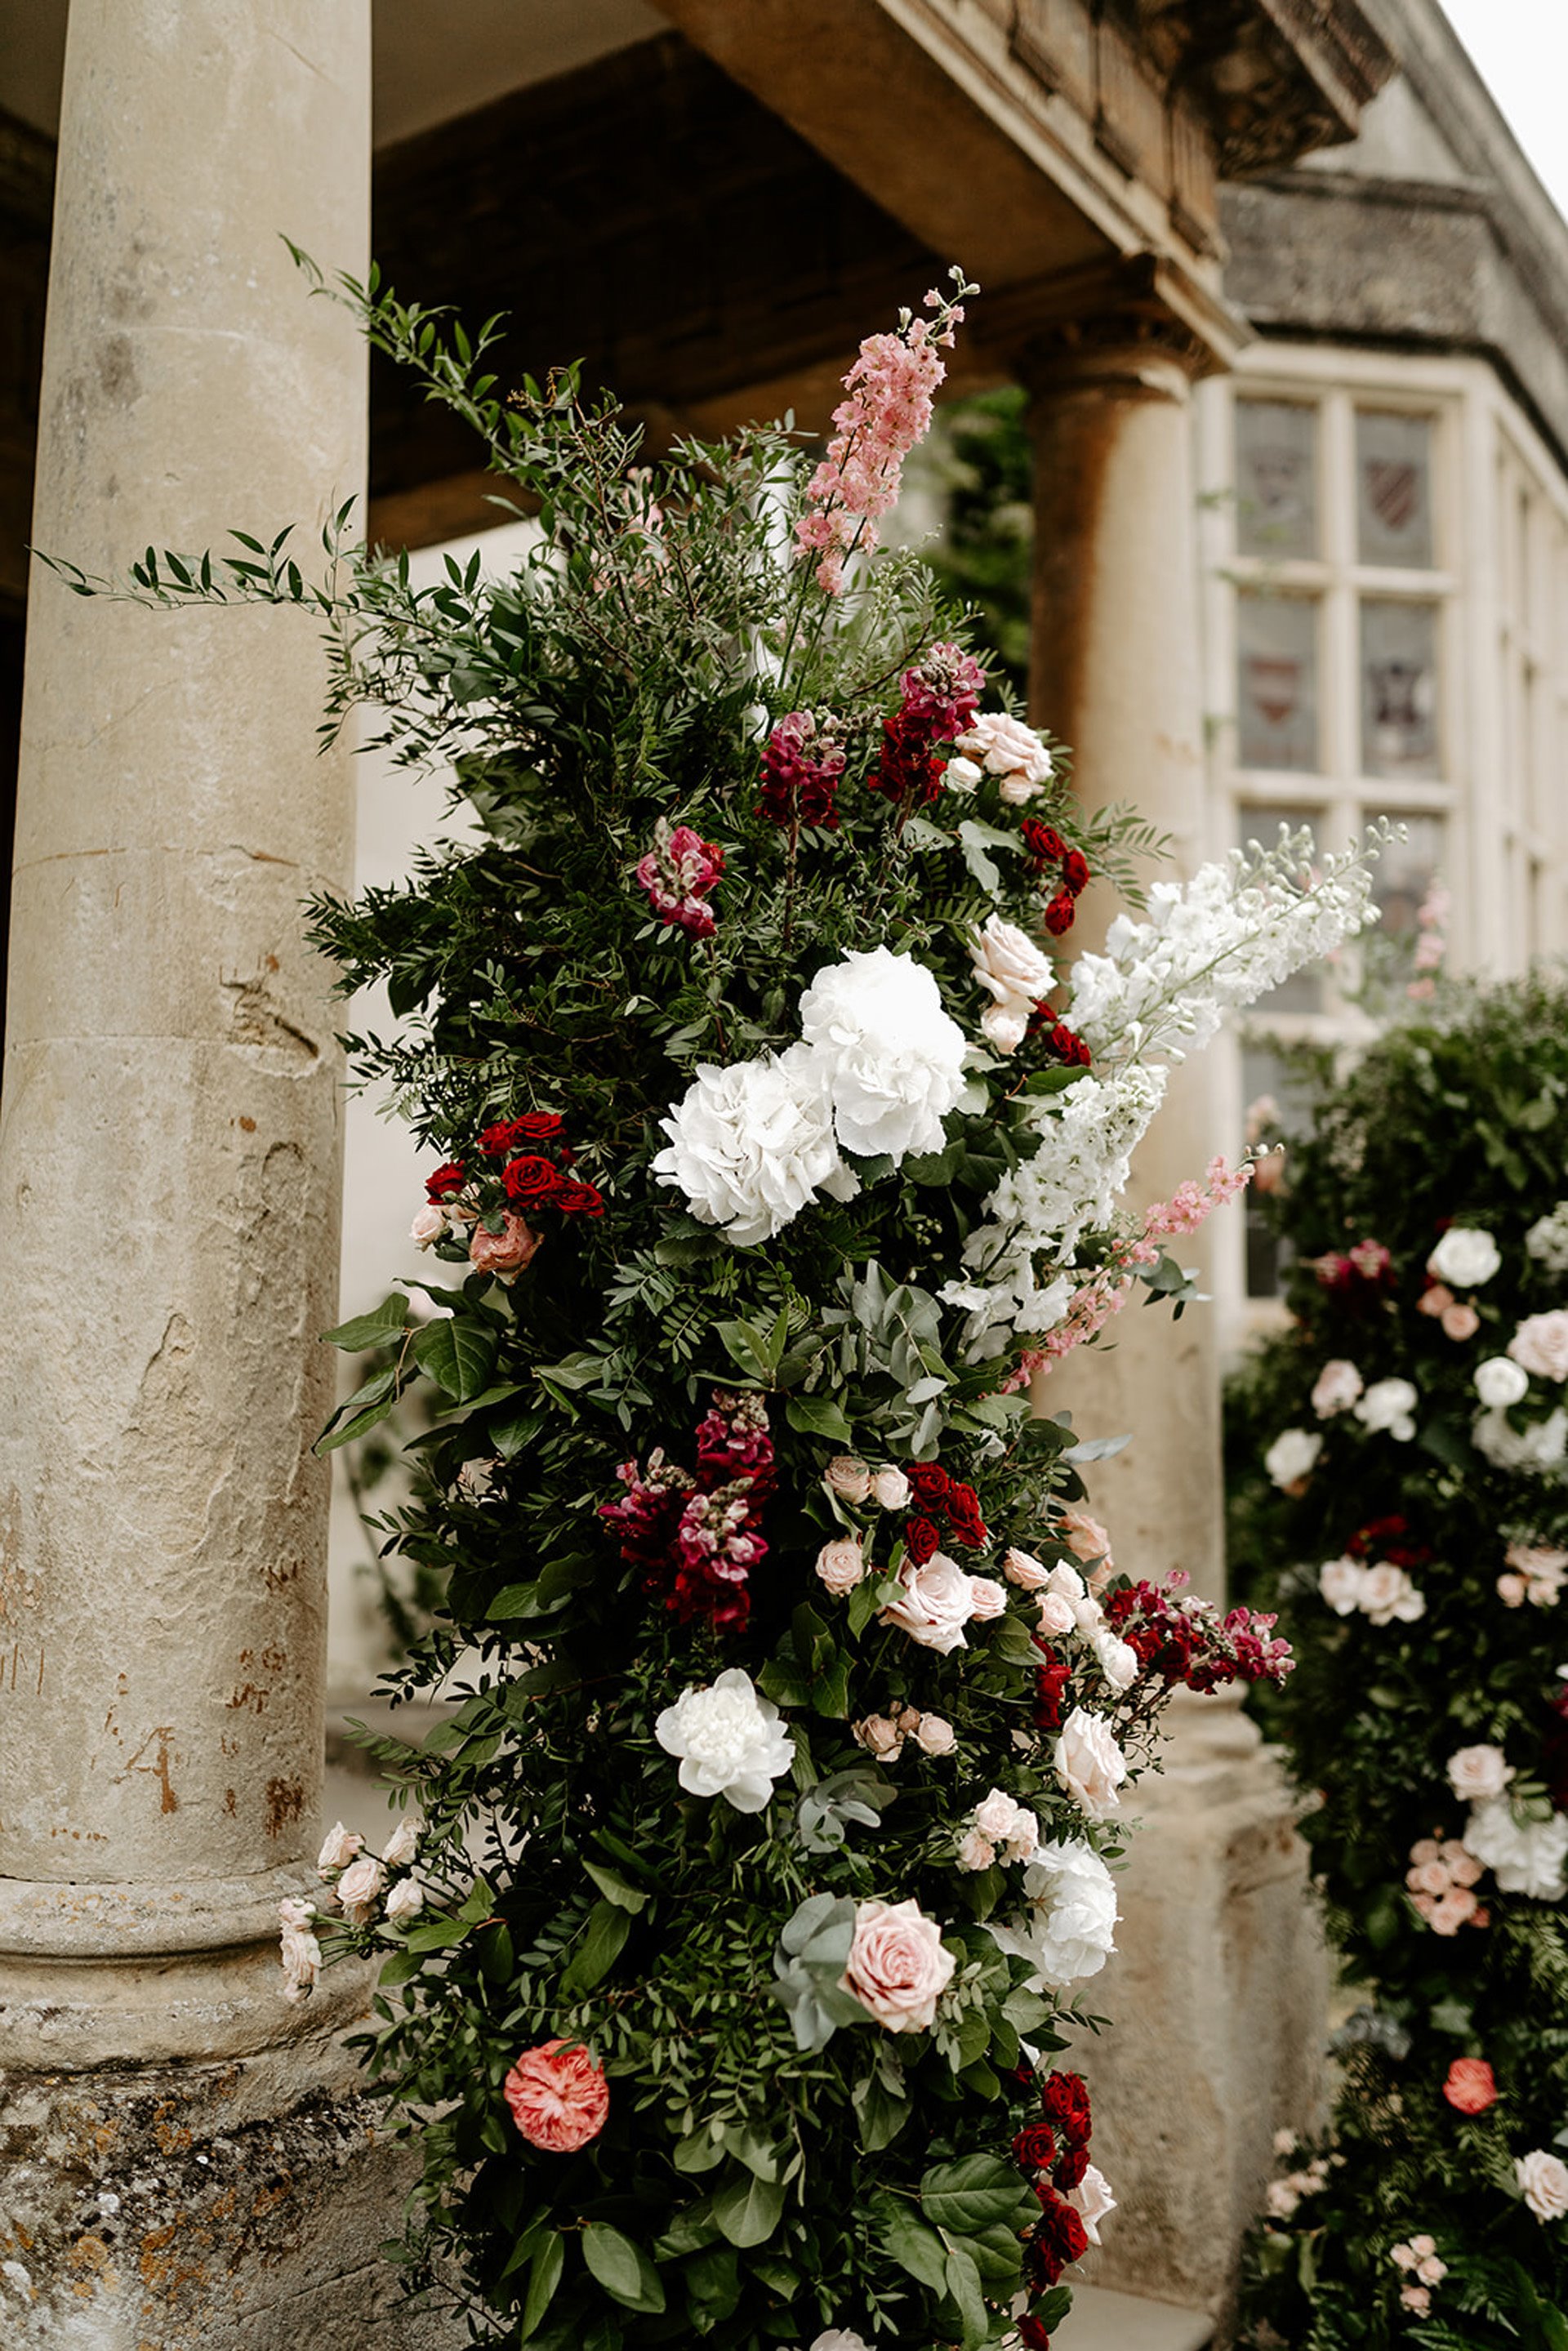 Romantic wedding flowers decorating entrance columns of old stately home wedding venue